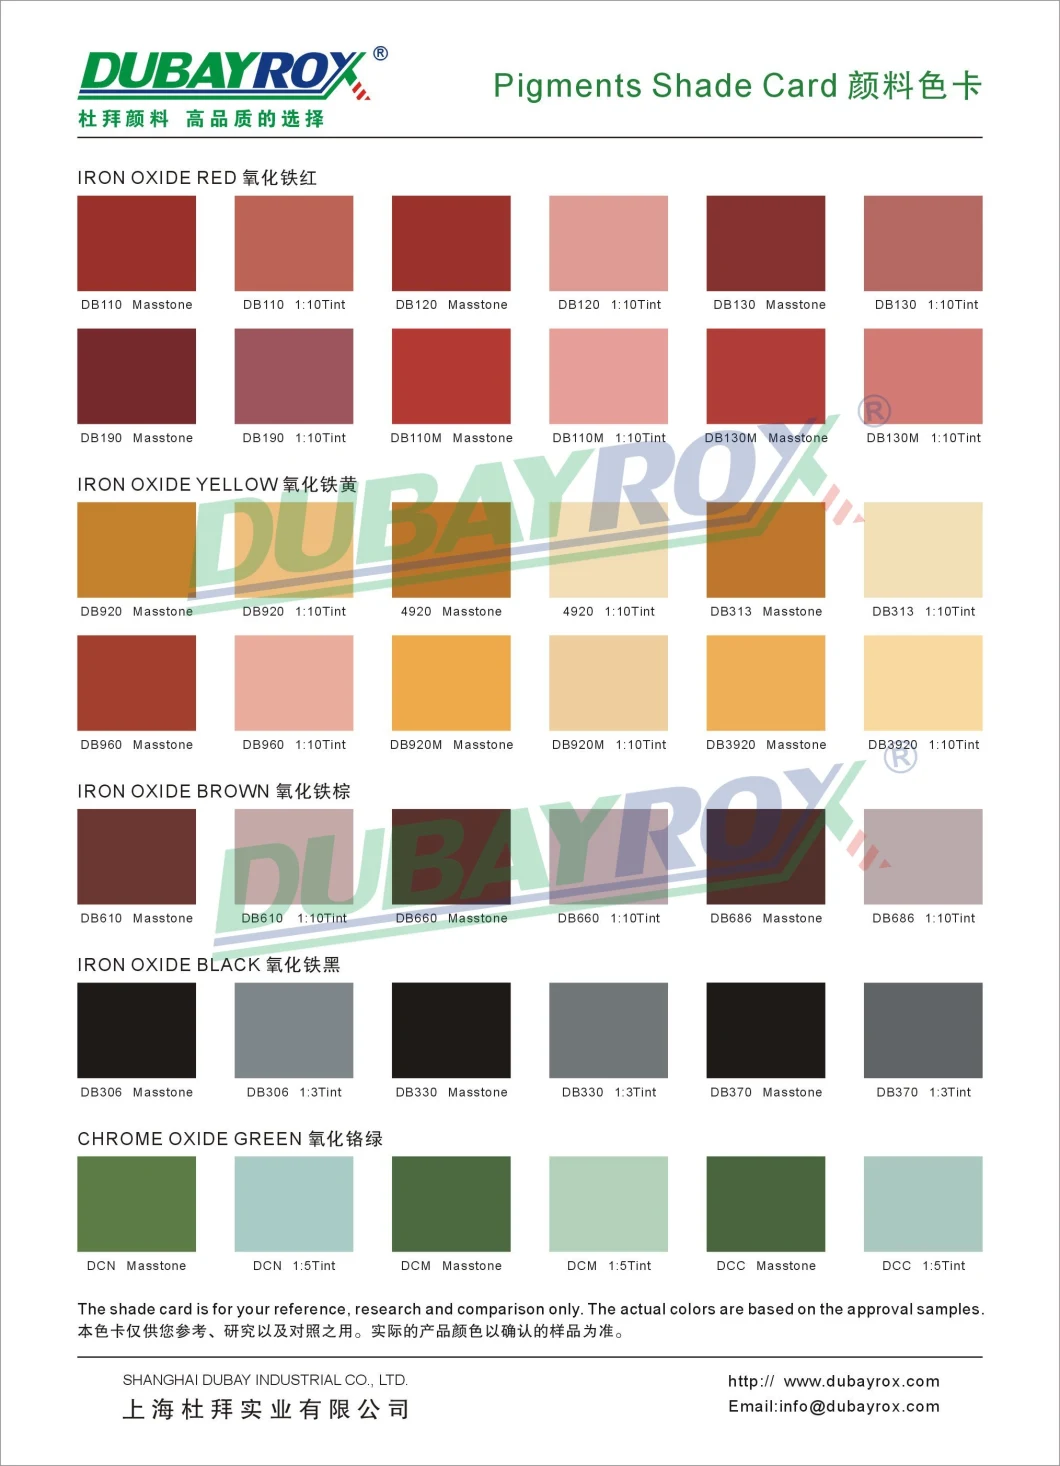 Iron Oxide Pigment for Brick Red Iron Oxide Fe2o3 Powder Pigment Powder Coating Manufacturers